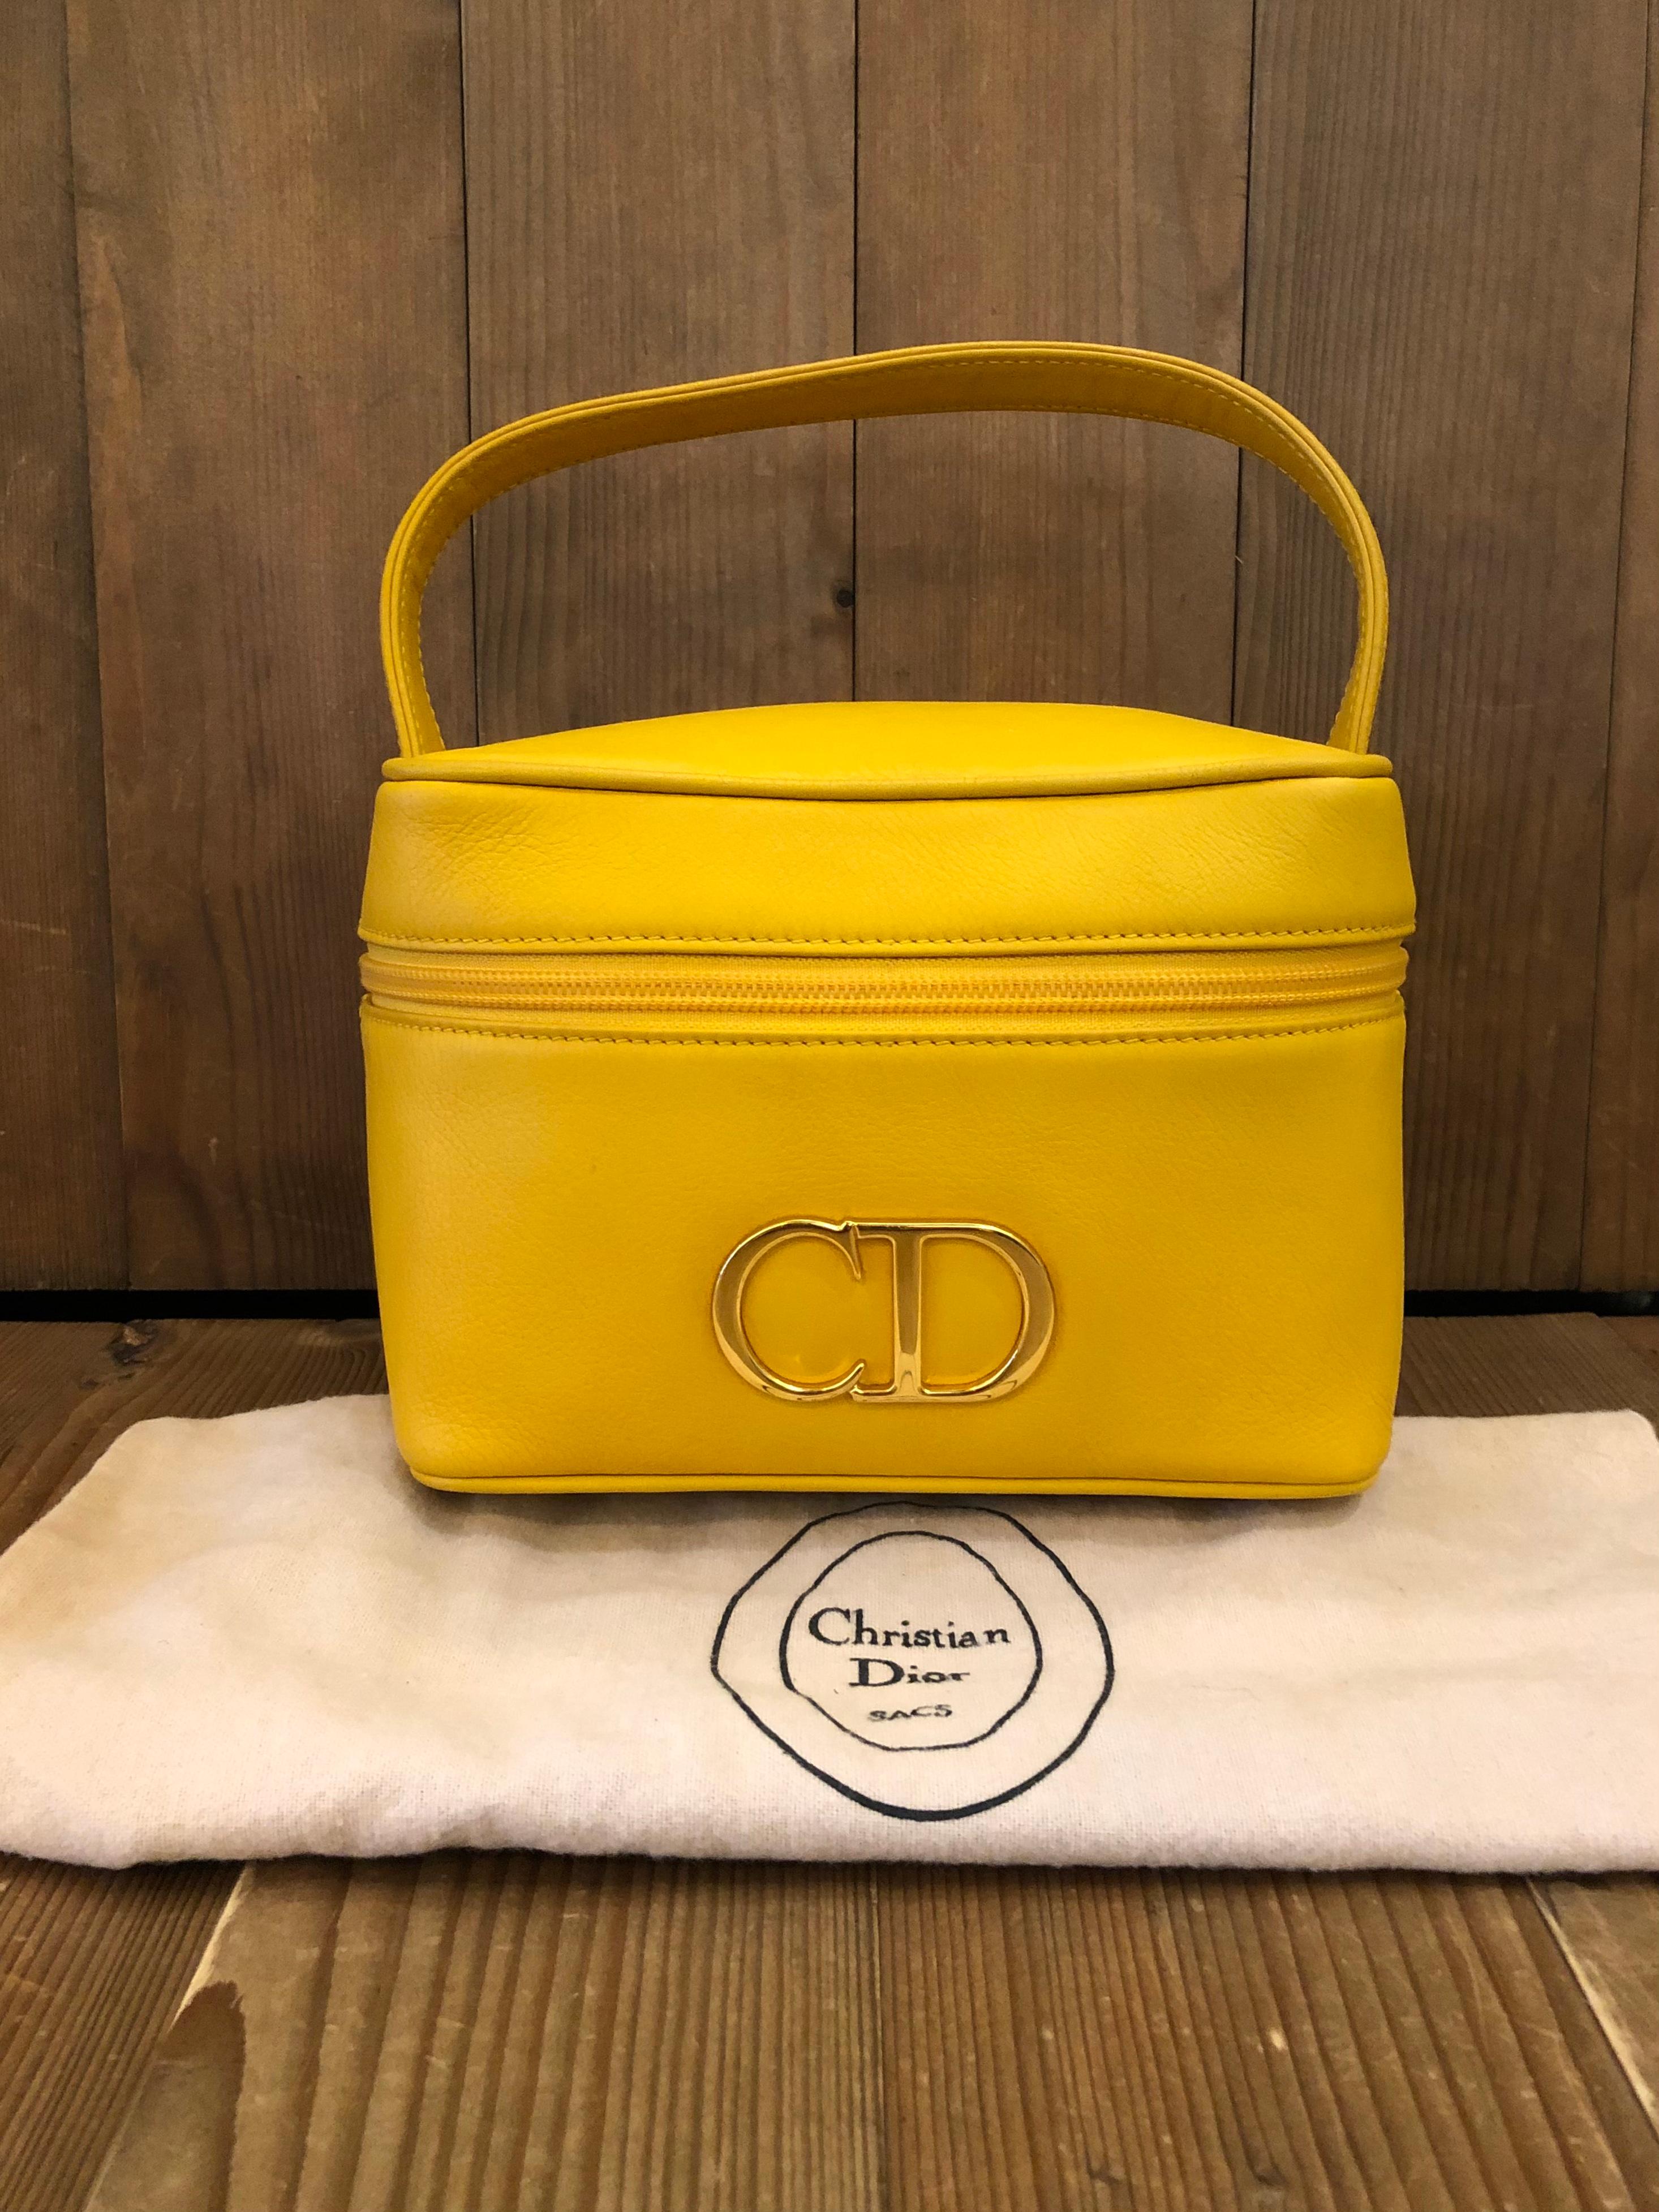 This vintage CHRISTIAN DIOR vanity case handbag is crafted of vivid yellow leather adorned with an oversized gold toned CD logo. Zip around closure which opens to a black leather interior. Perfect for cosmetic storage or carrying as a handbag to